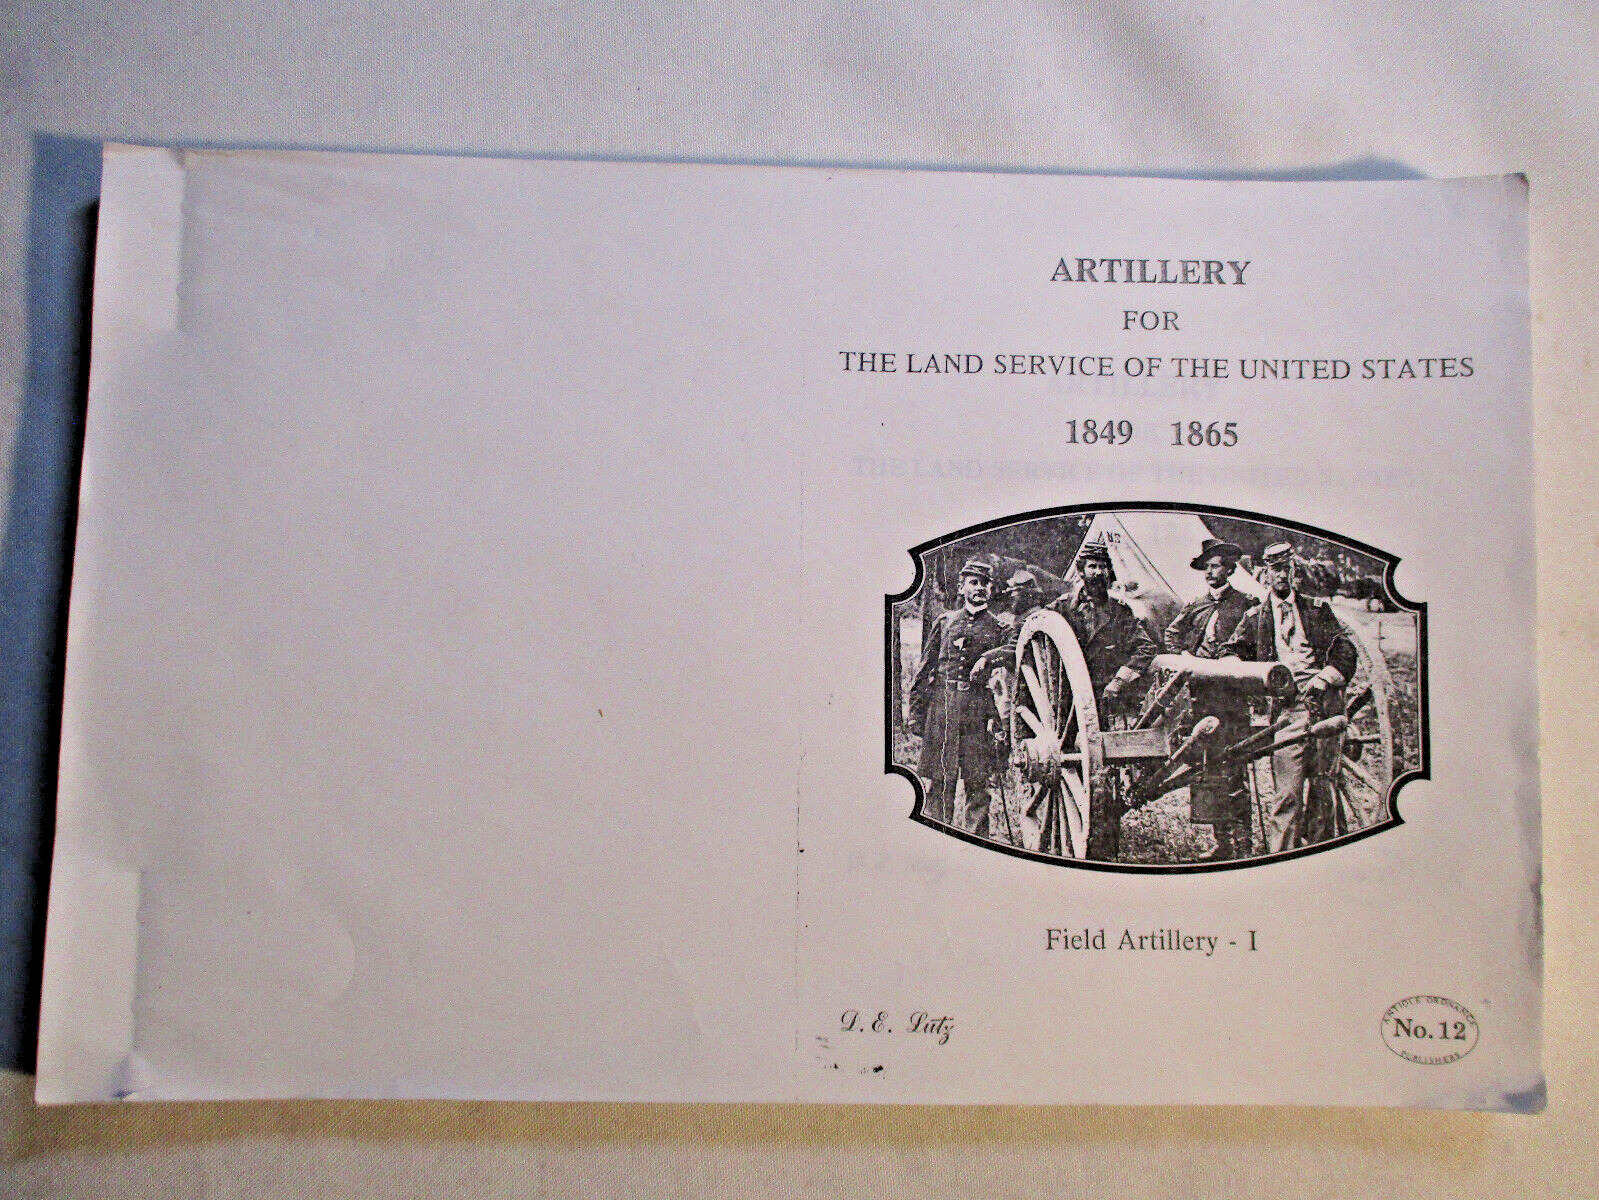 Artillery For The Land Service of The United States 1849 1865 Field Artillery I